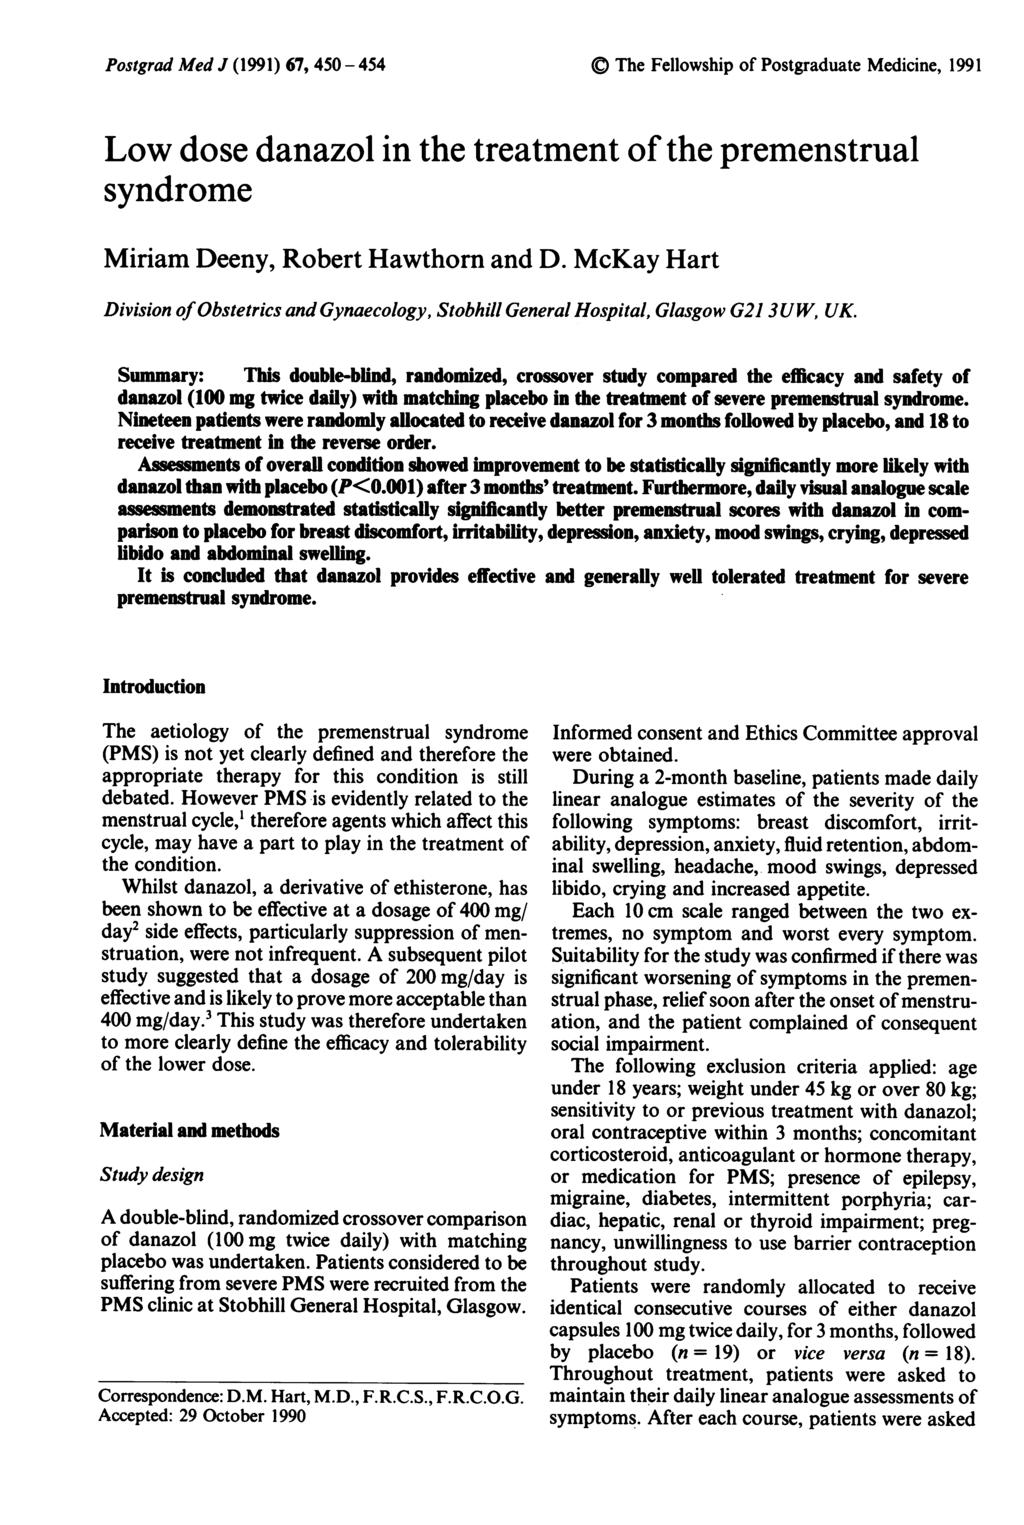 Postgrad Med J (1991) 67, 450-454 The Fellowship of Postgraduate Medicine, 1991 Low dose danazol in the treatment of the premenstrual syndrome Miriam Deeny, Robert Hawthorn and D.